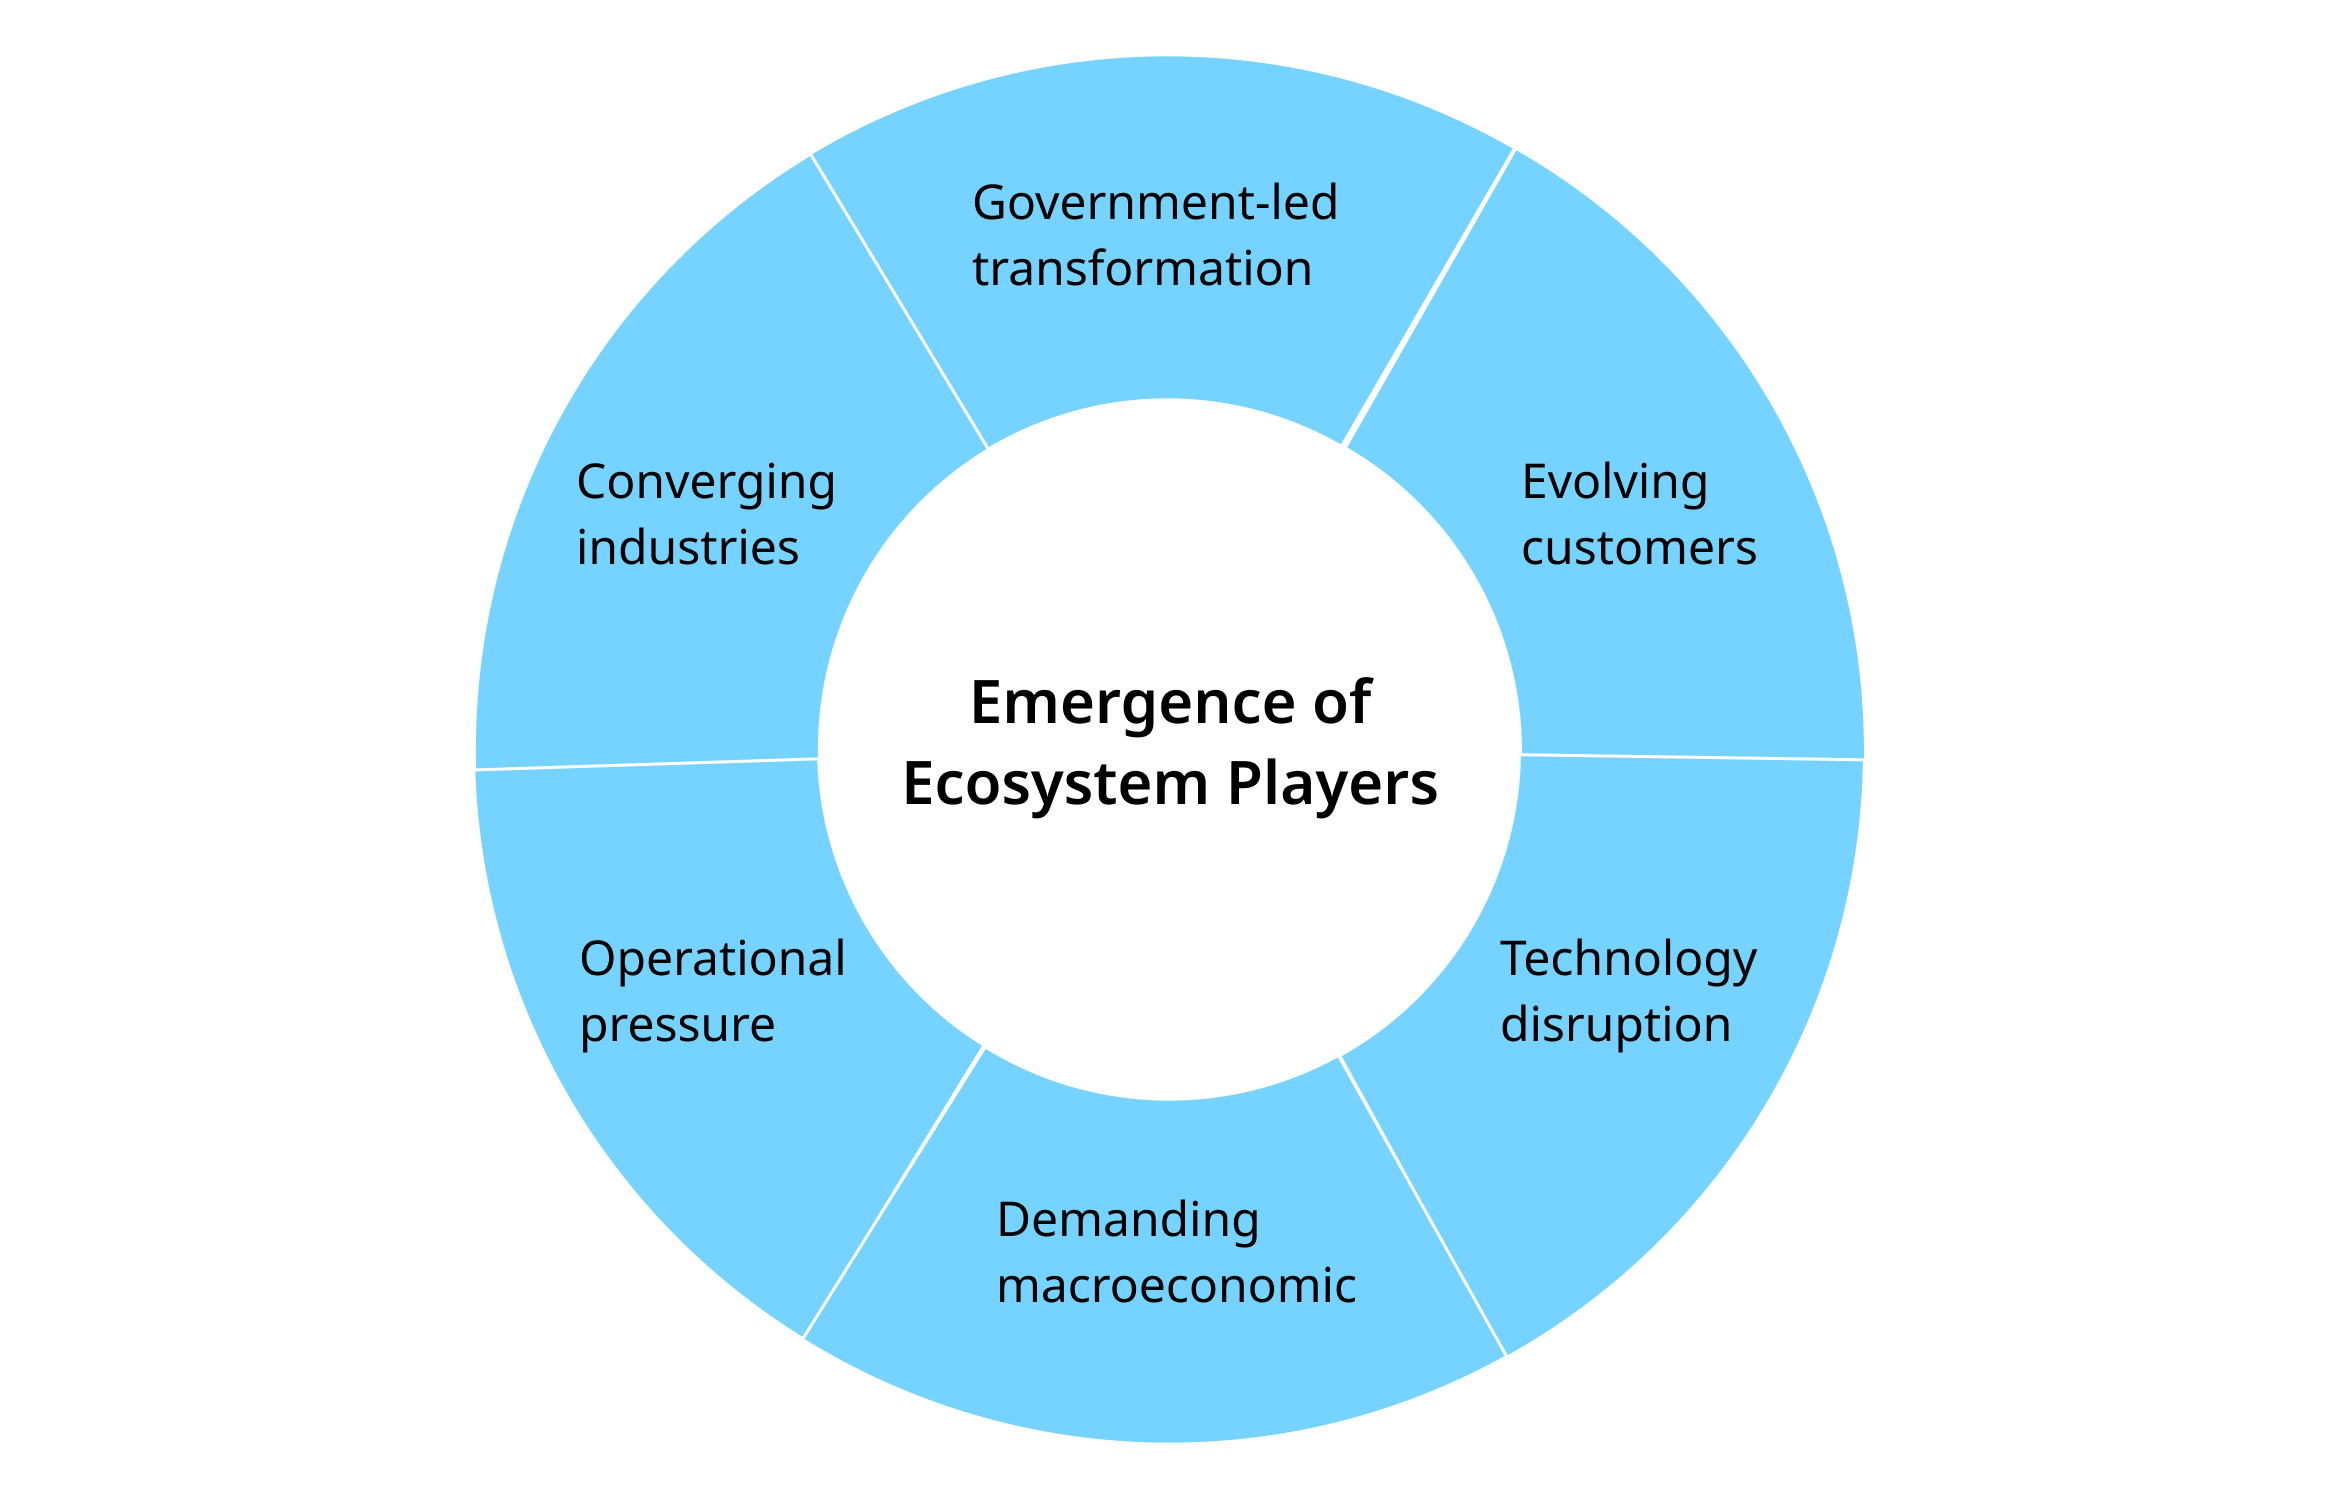 An image with the title "Emergence of Ecosystem Players". Under it, 6 items are listed: 1. Government-led transformation. 2. Evolving customers. 3. Technology disruption. 4. Demanding macroeconomic. 5. Operational pressure. 6.Converging industries.